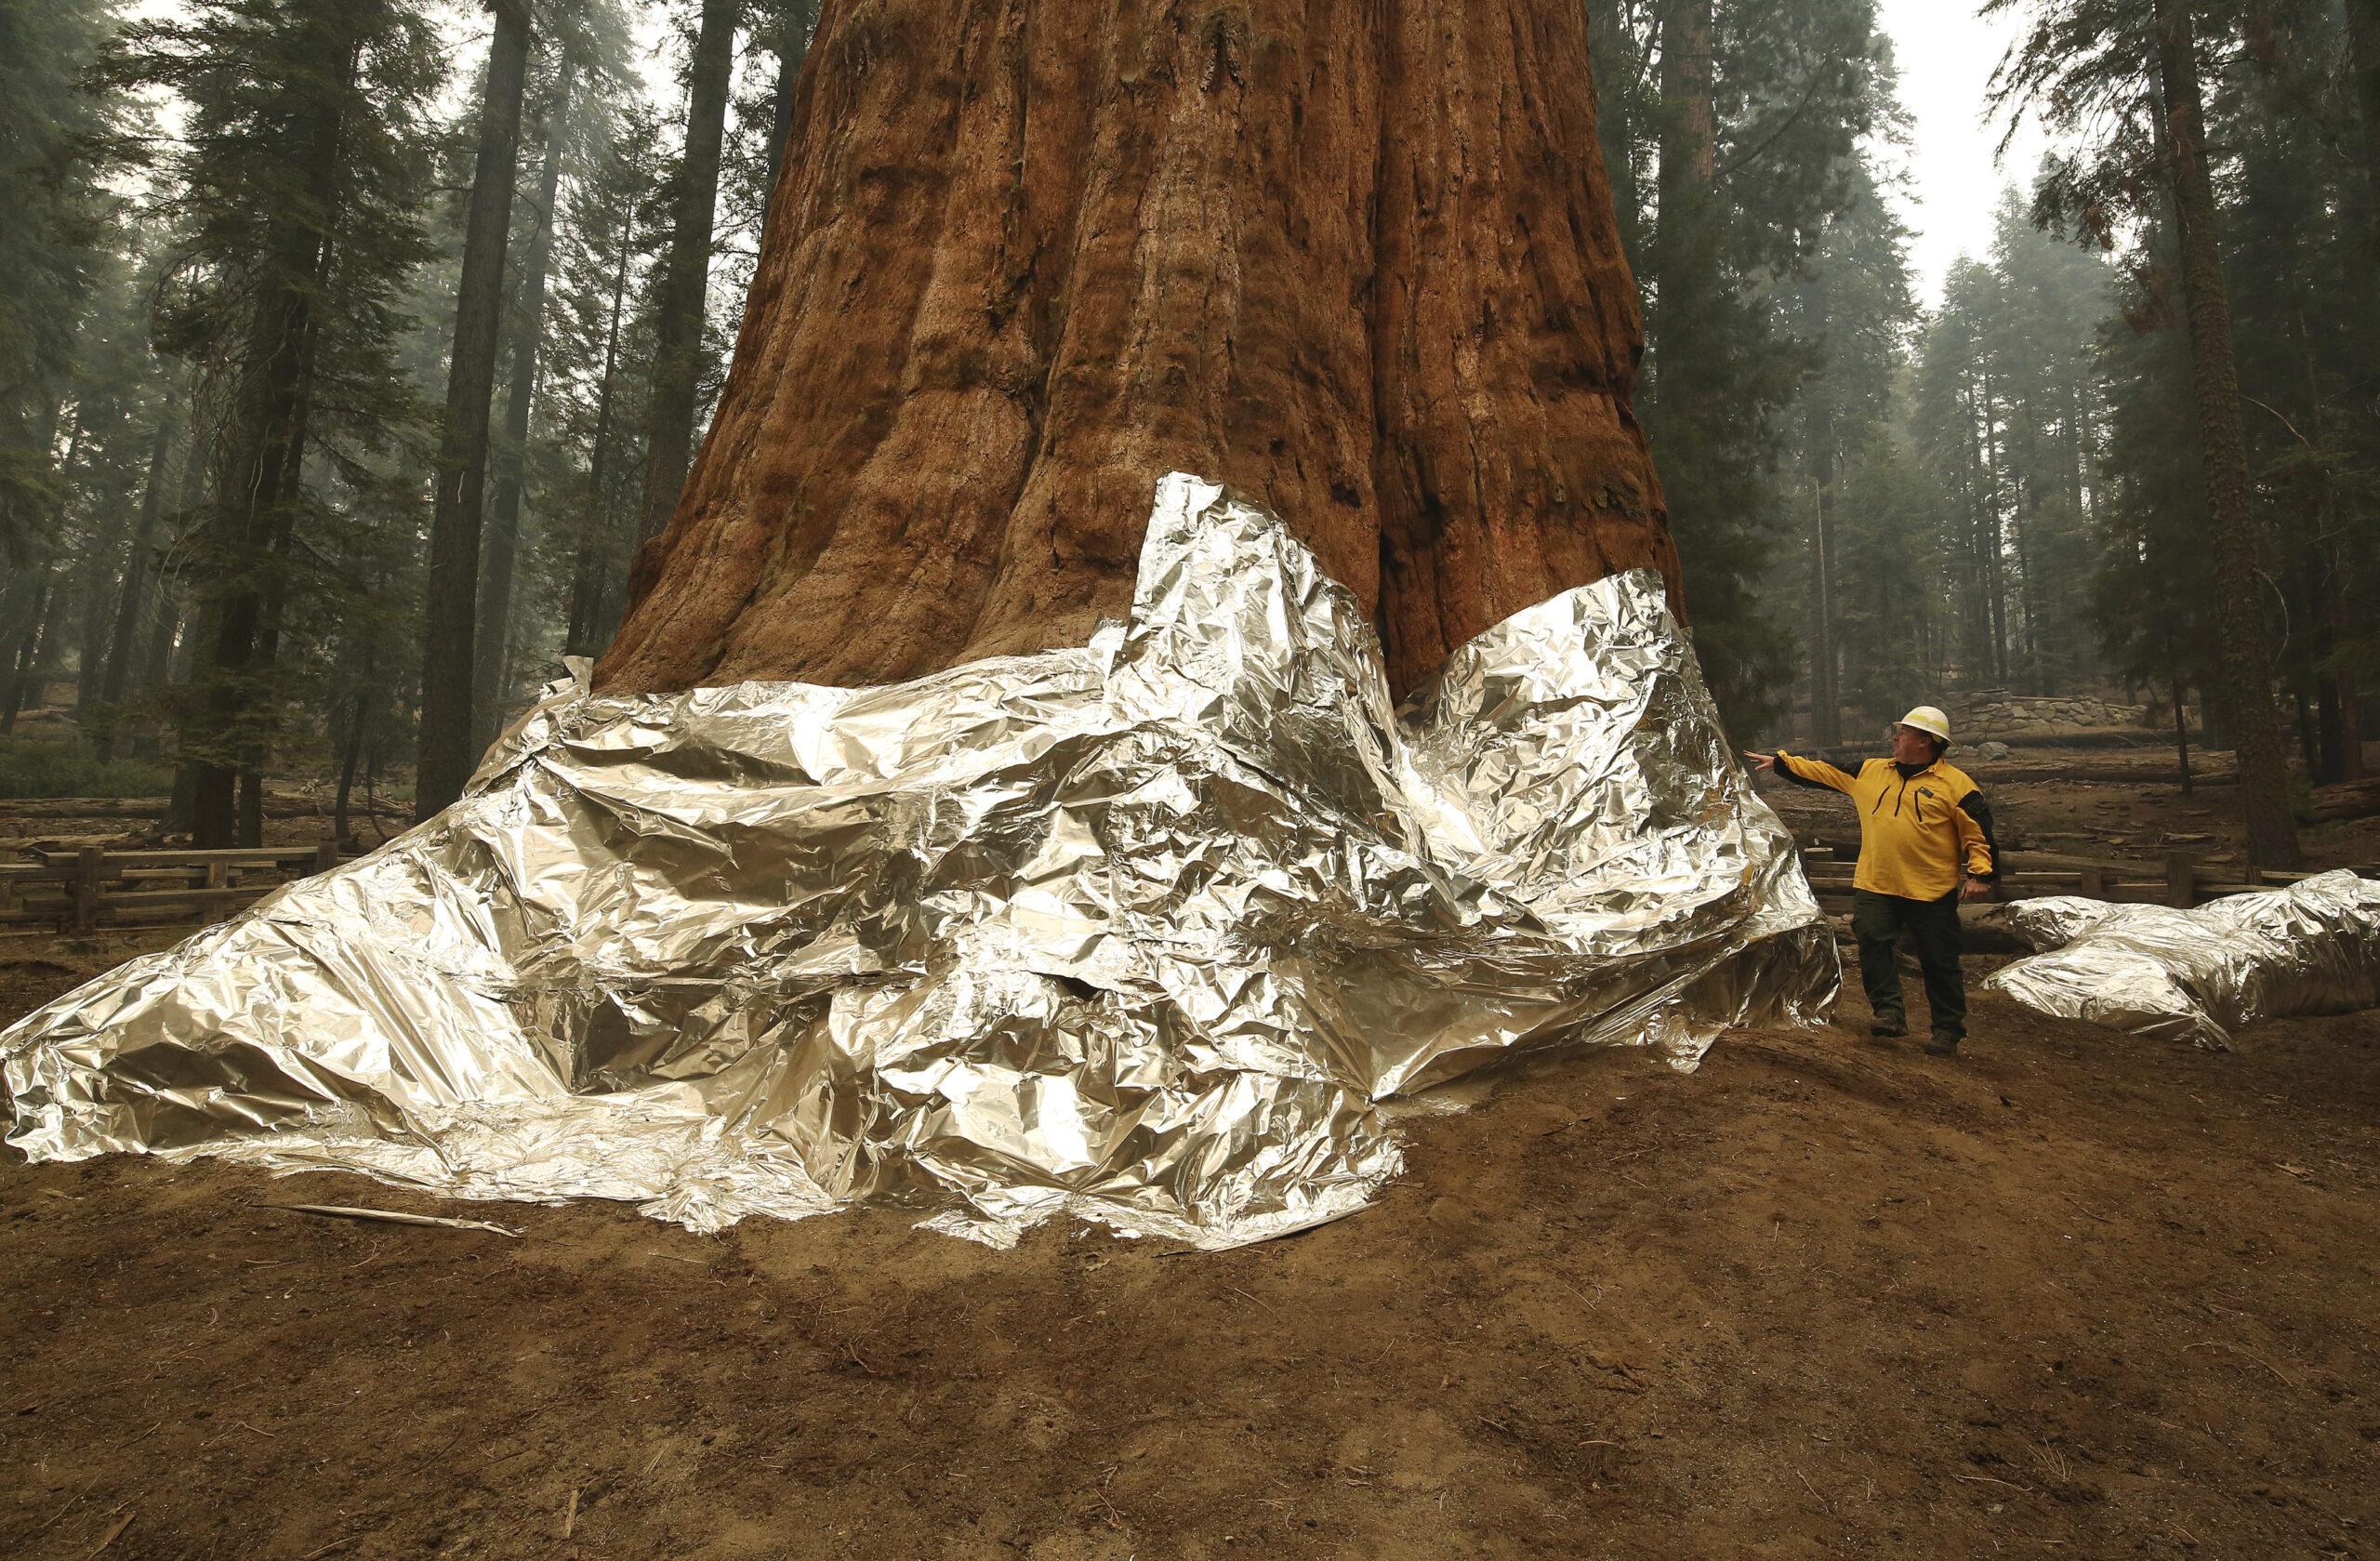 Jon Wallace, Operations Section Chief, looks over General Sherman where the historic tree was protected by structure wrap from fires along with the Four Guardsmen at Sequoia National Park, Calif., Wednesday, Sept. 22, 2021. (AP Photo/Gary Kazanjian)